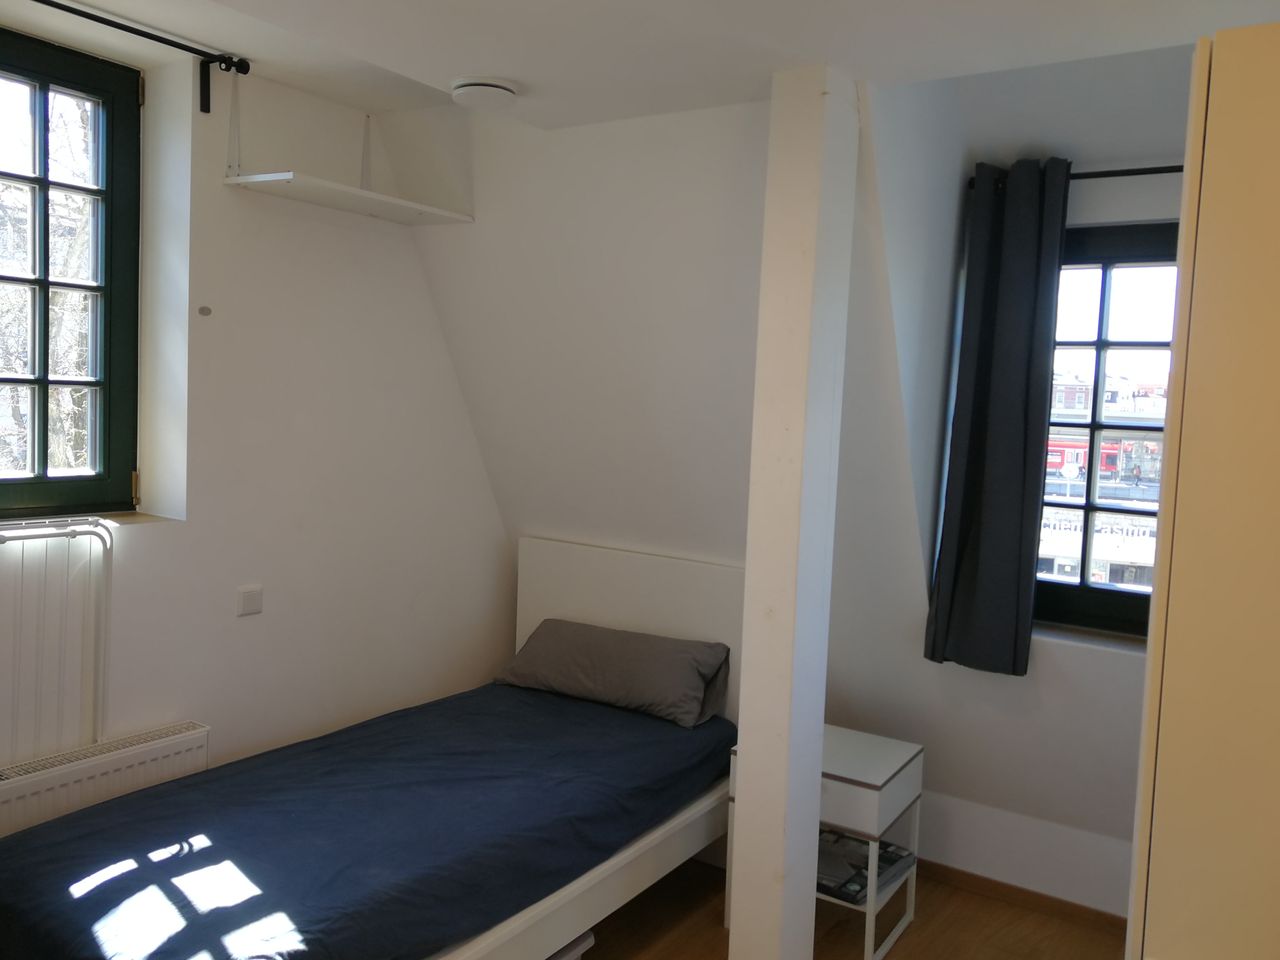 Studio apartment at Pasing station and shopping centre